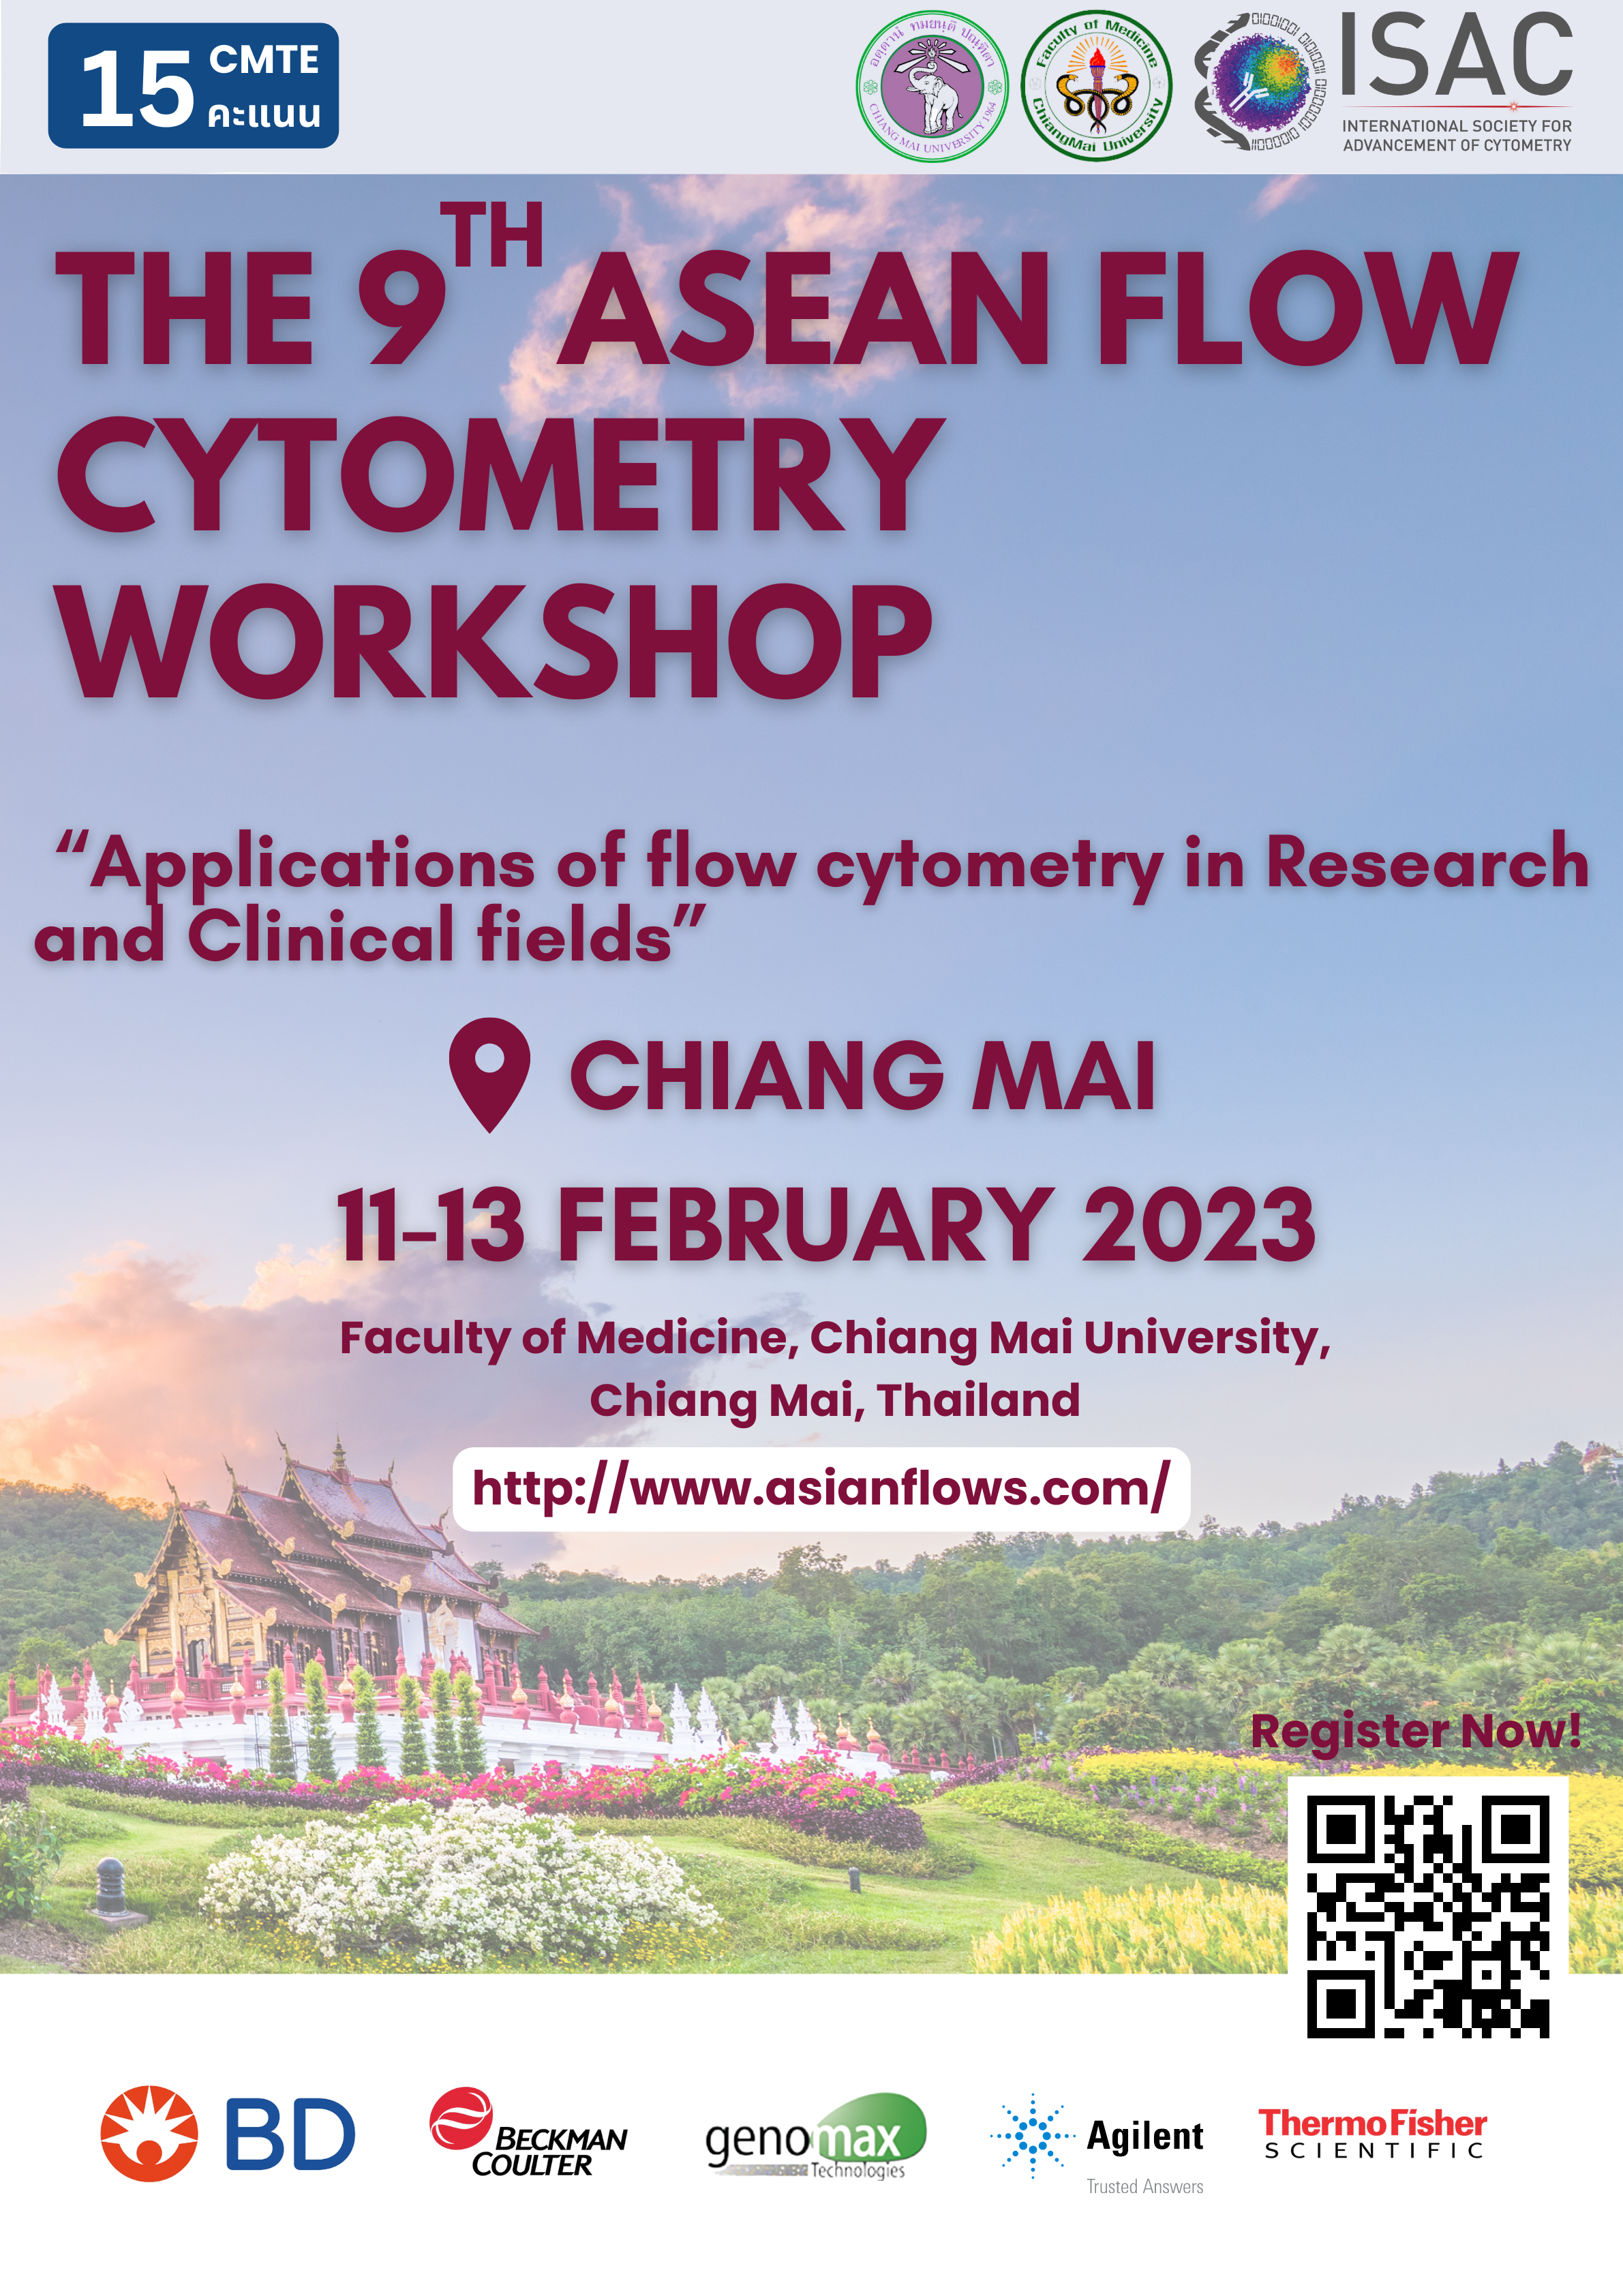 The 9th ASEAN Flow Cytometry WorkshopPromotional1